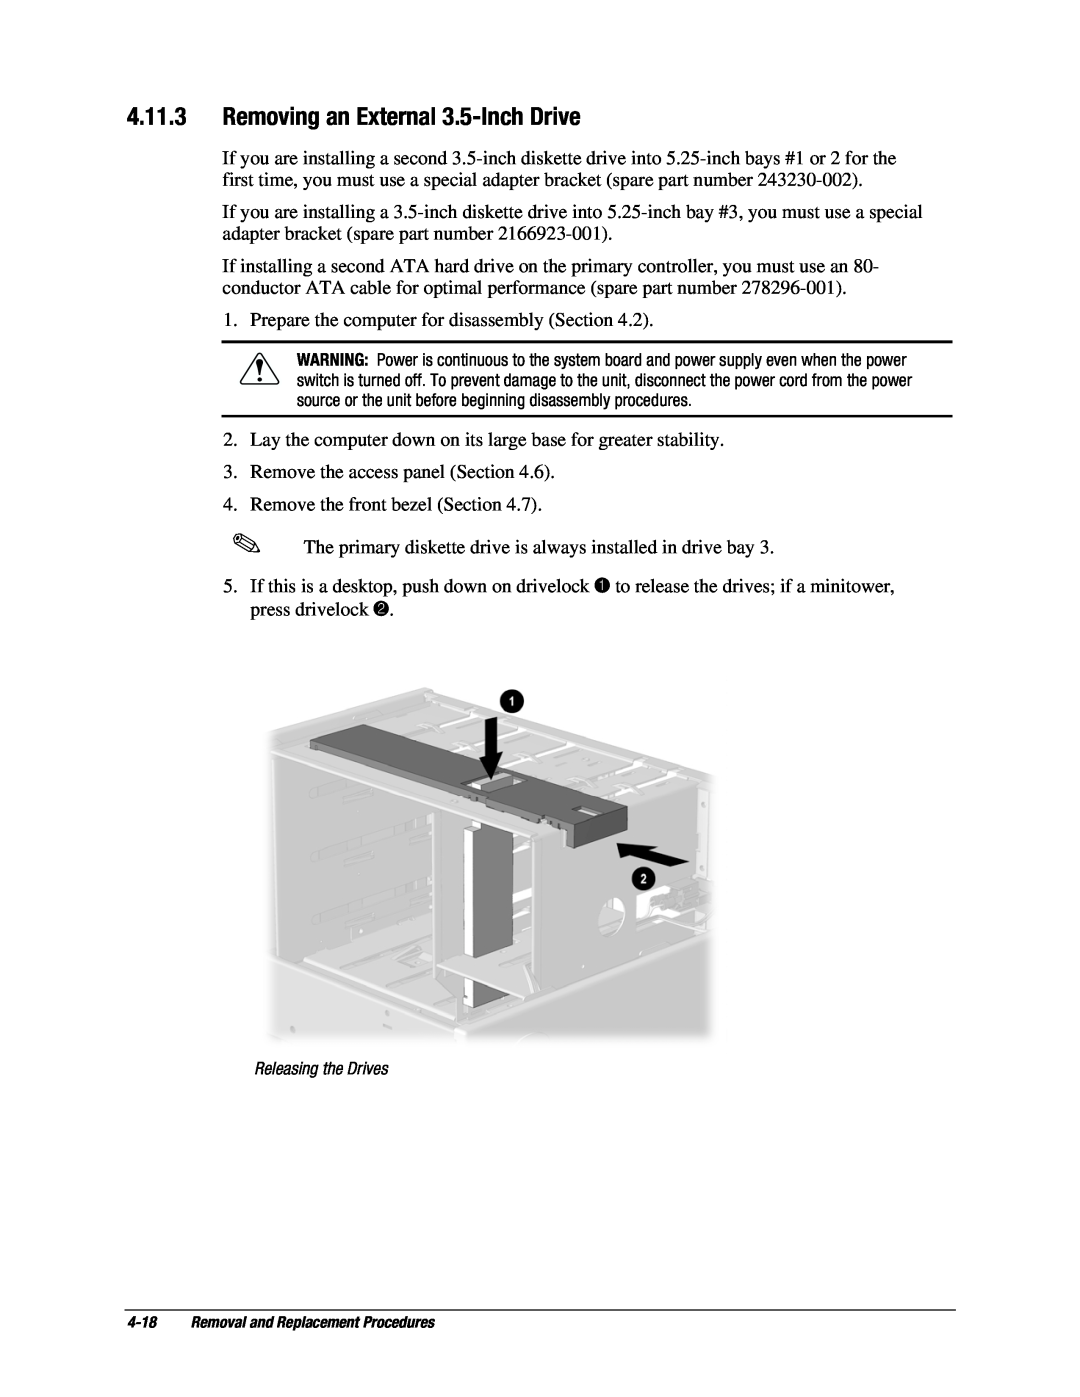 Compaq EP Series manual Removing an External 3.5-Inch Drive, Removal and Replacement Procedures 